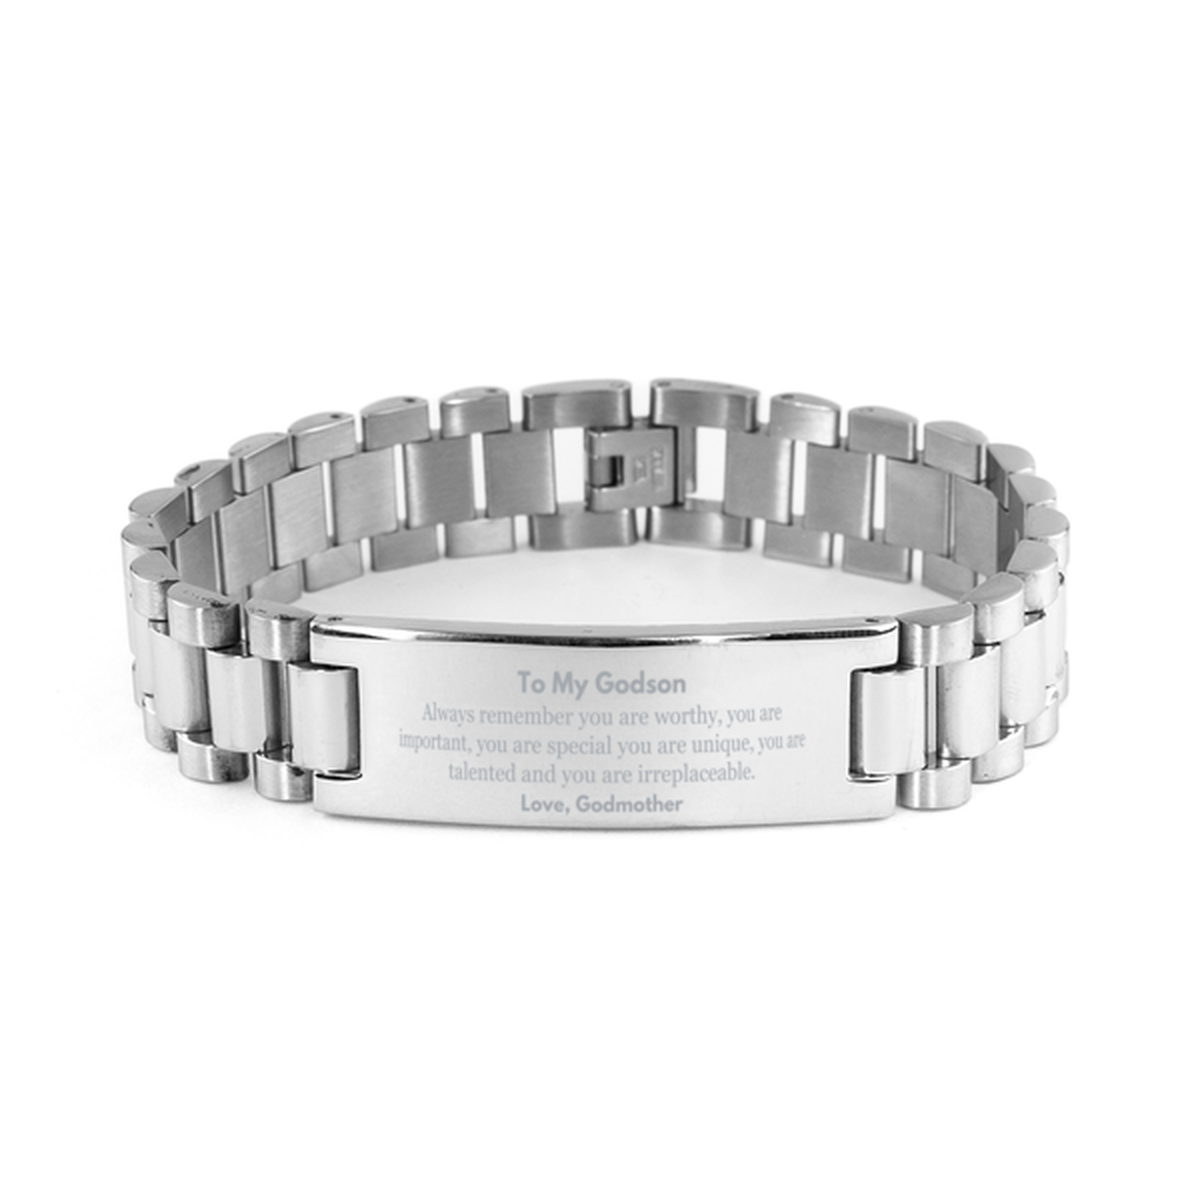 Godson Birthday Gifts from Godmother, Inspirational Ladder Stainless Steel Bracelet for Godson Christmas Graduation Gifts for Godson Always remember you are worthy, you are important. Love, Godmother